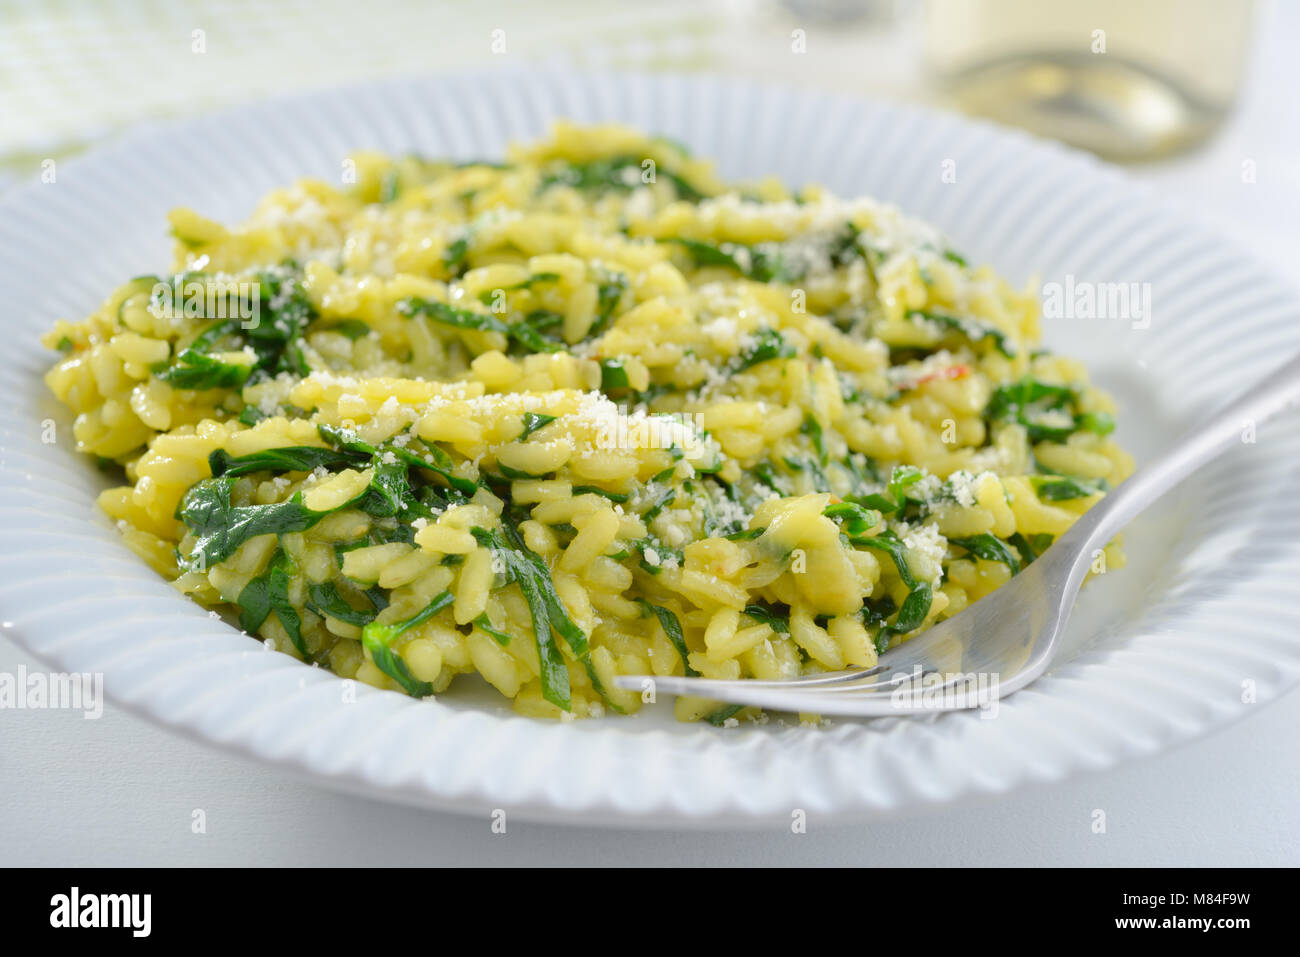 Spinach risotto with saffron and grated Parmesan cheese Stock Photo